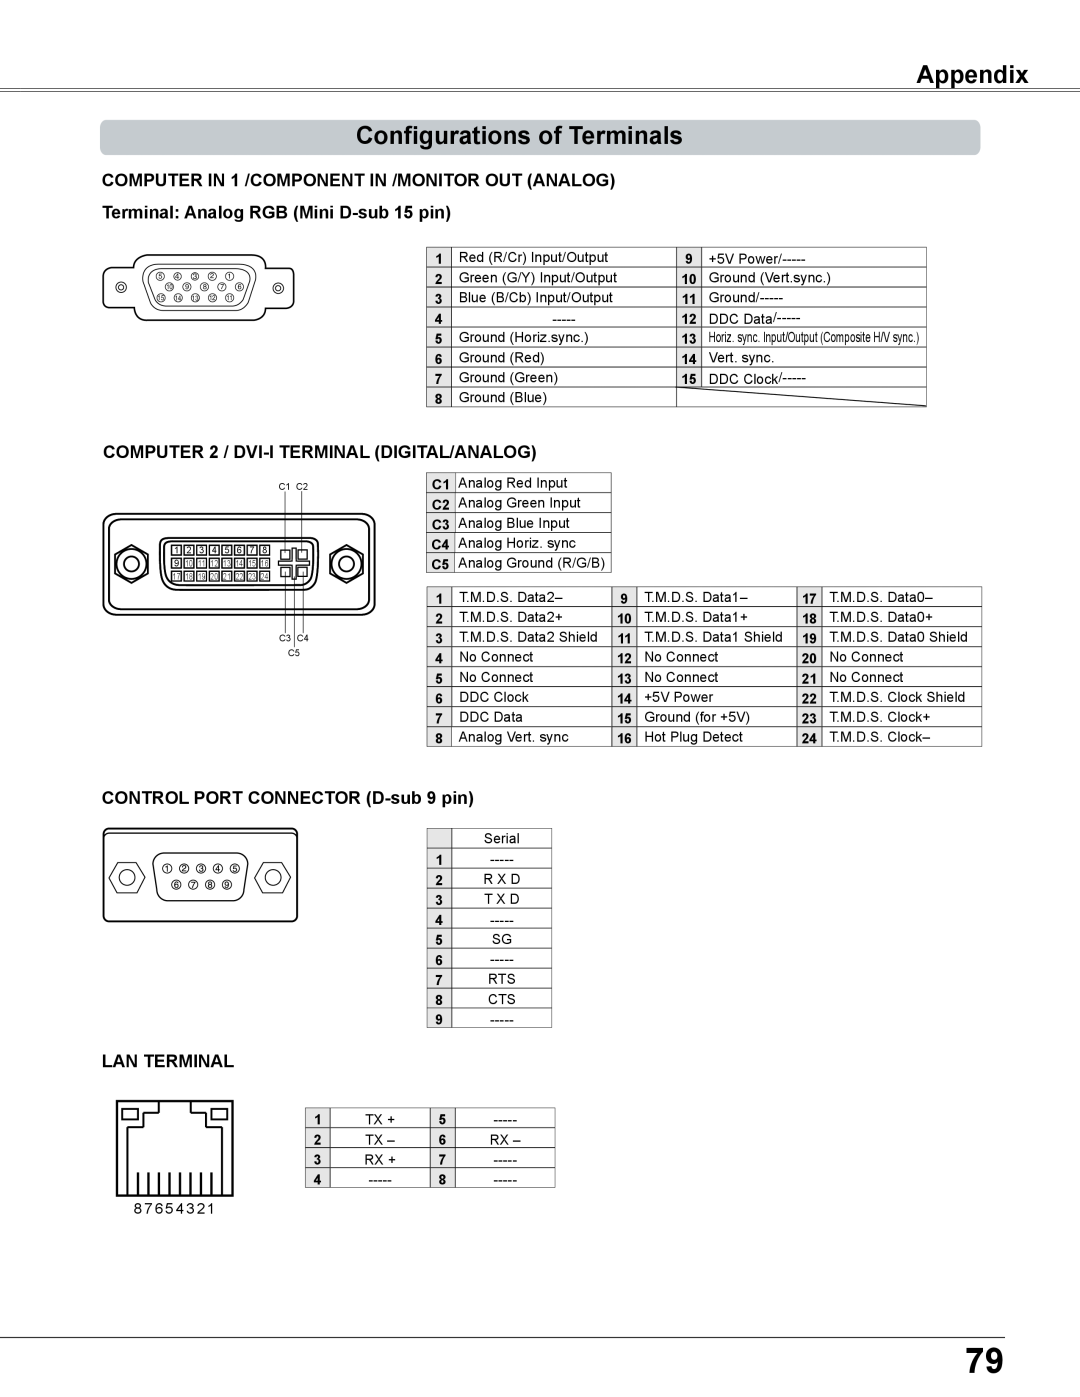 Sanyo PLC-XC56 Appendix Configurations of Terminals, COMPUTER IN 1 /COMPONENT IN /MONITOR OUT ANALOG, Lan Terminal 